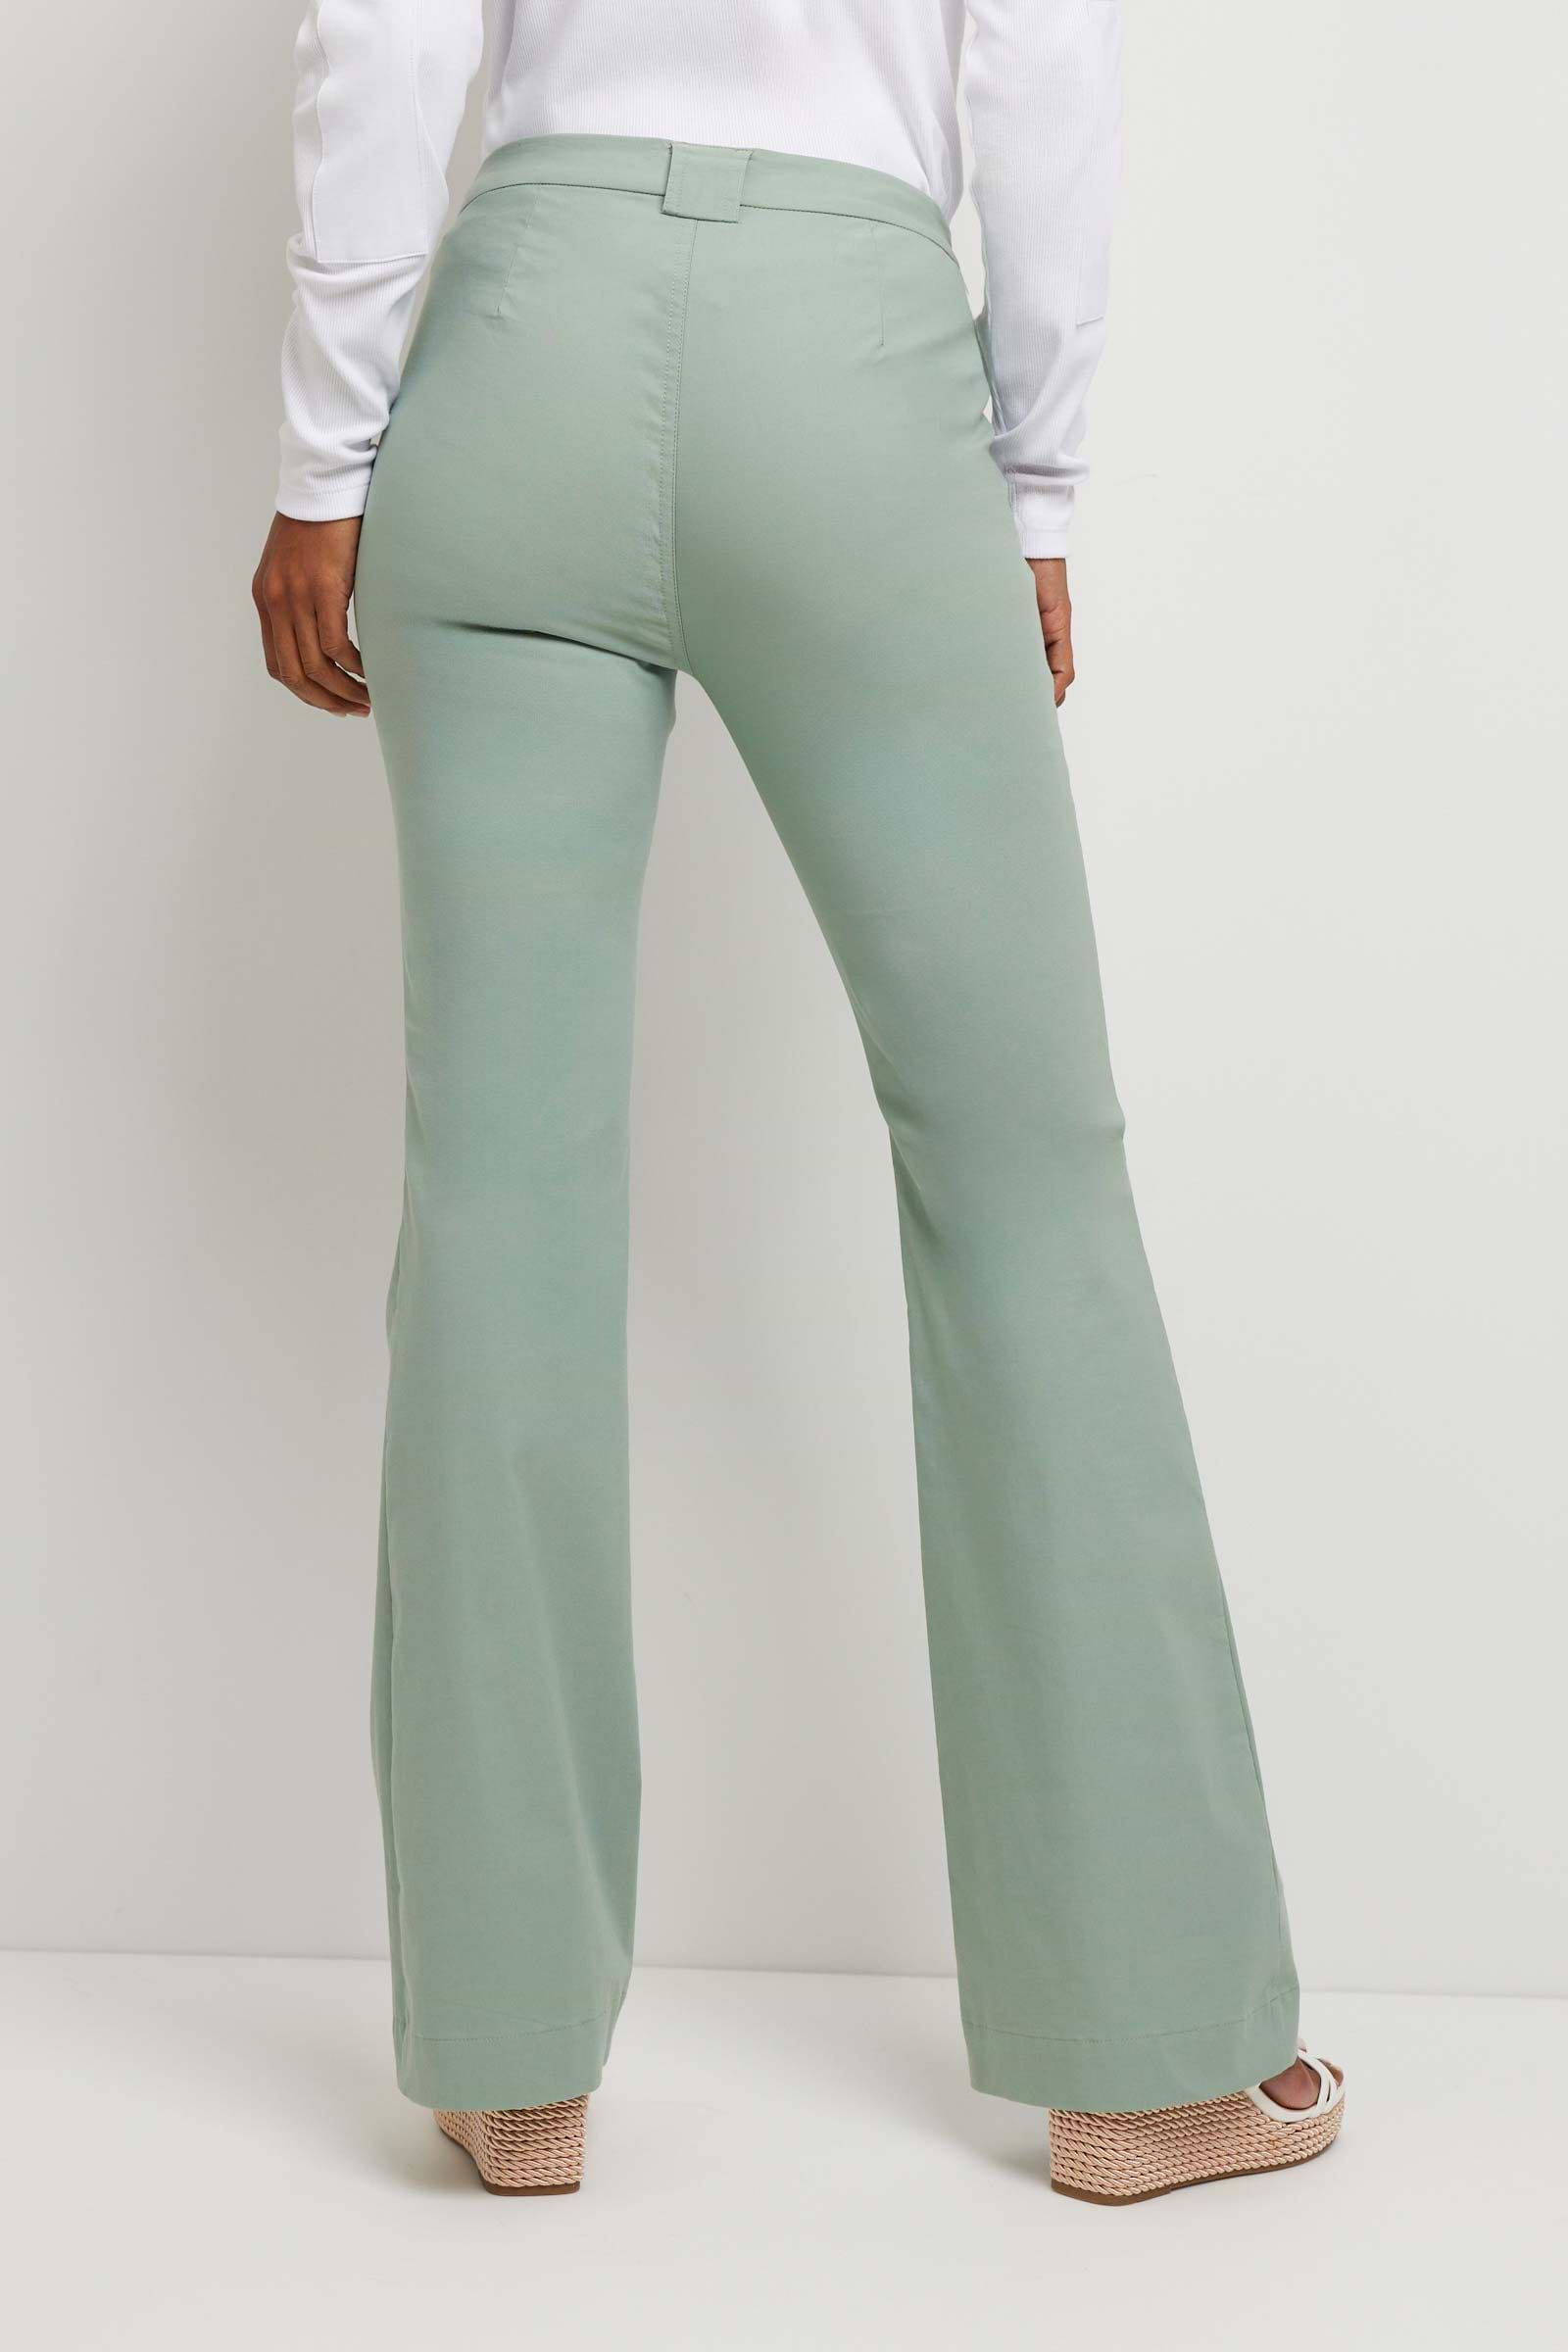 The Best Travel Pant. Back Profile of a Darby Pant in Sage.